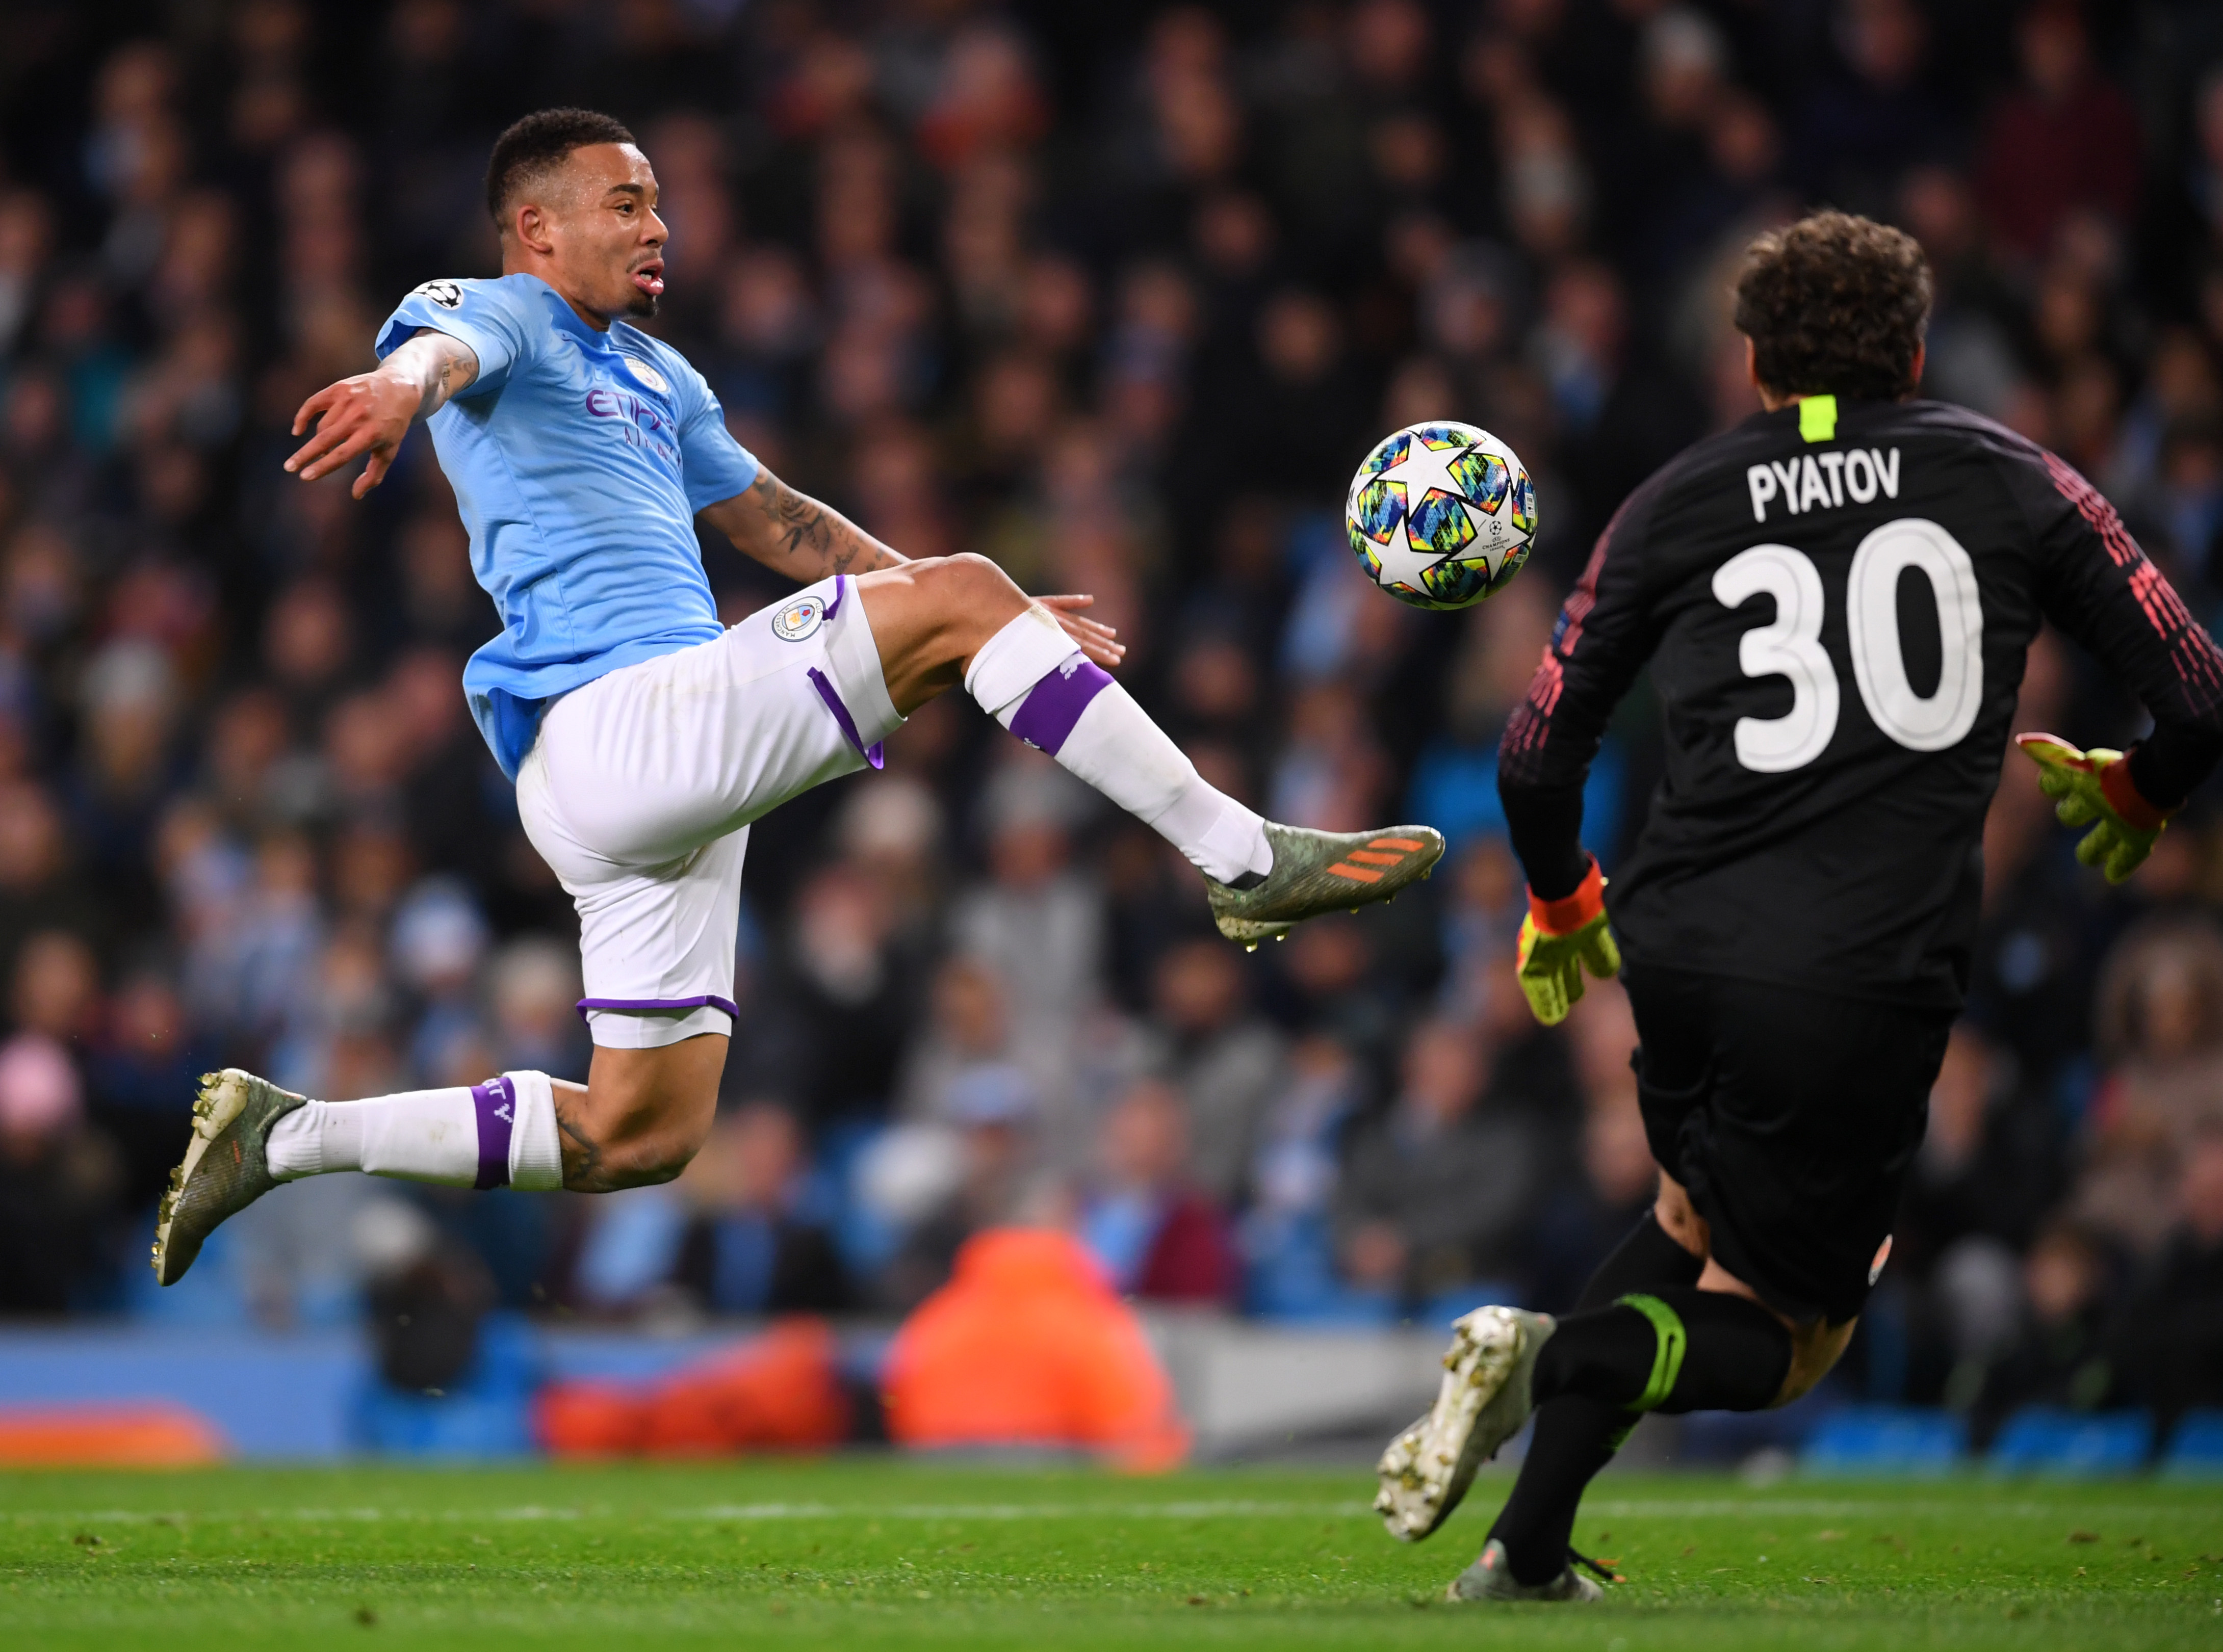 Can Jesus step up in Aguero's absence? (Photo by Laurence Griffiths/Getty Images)